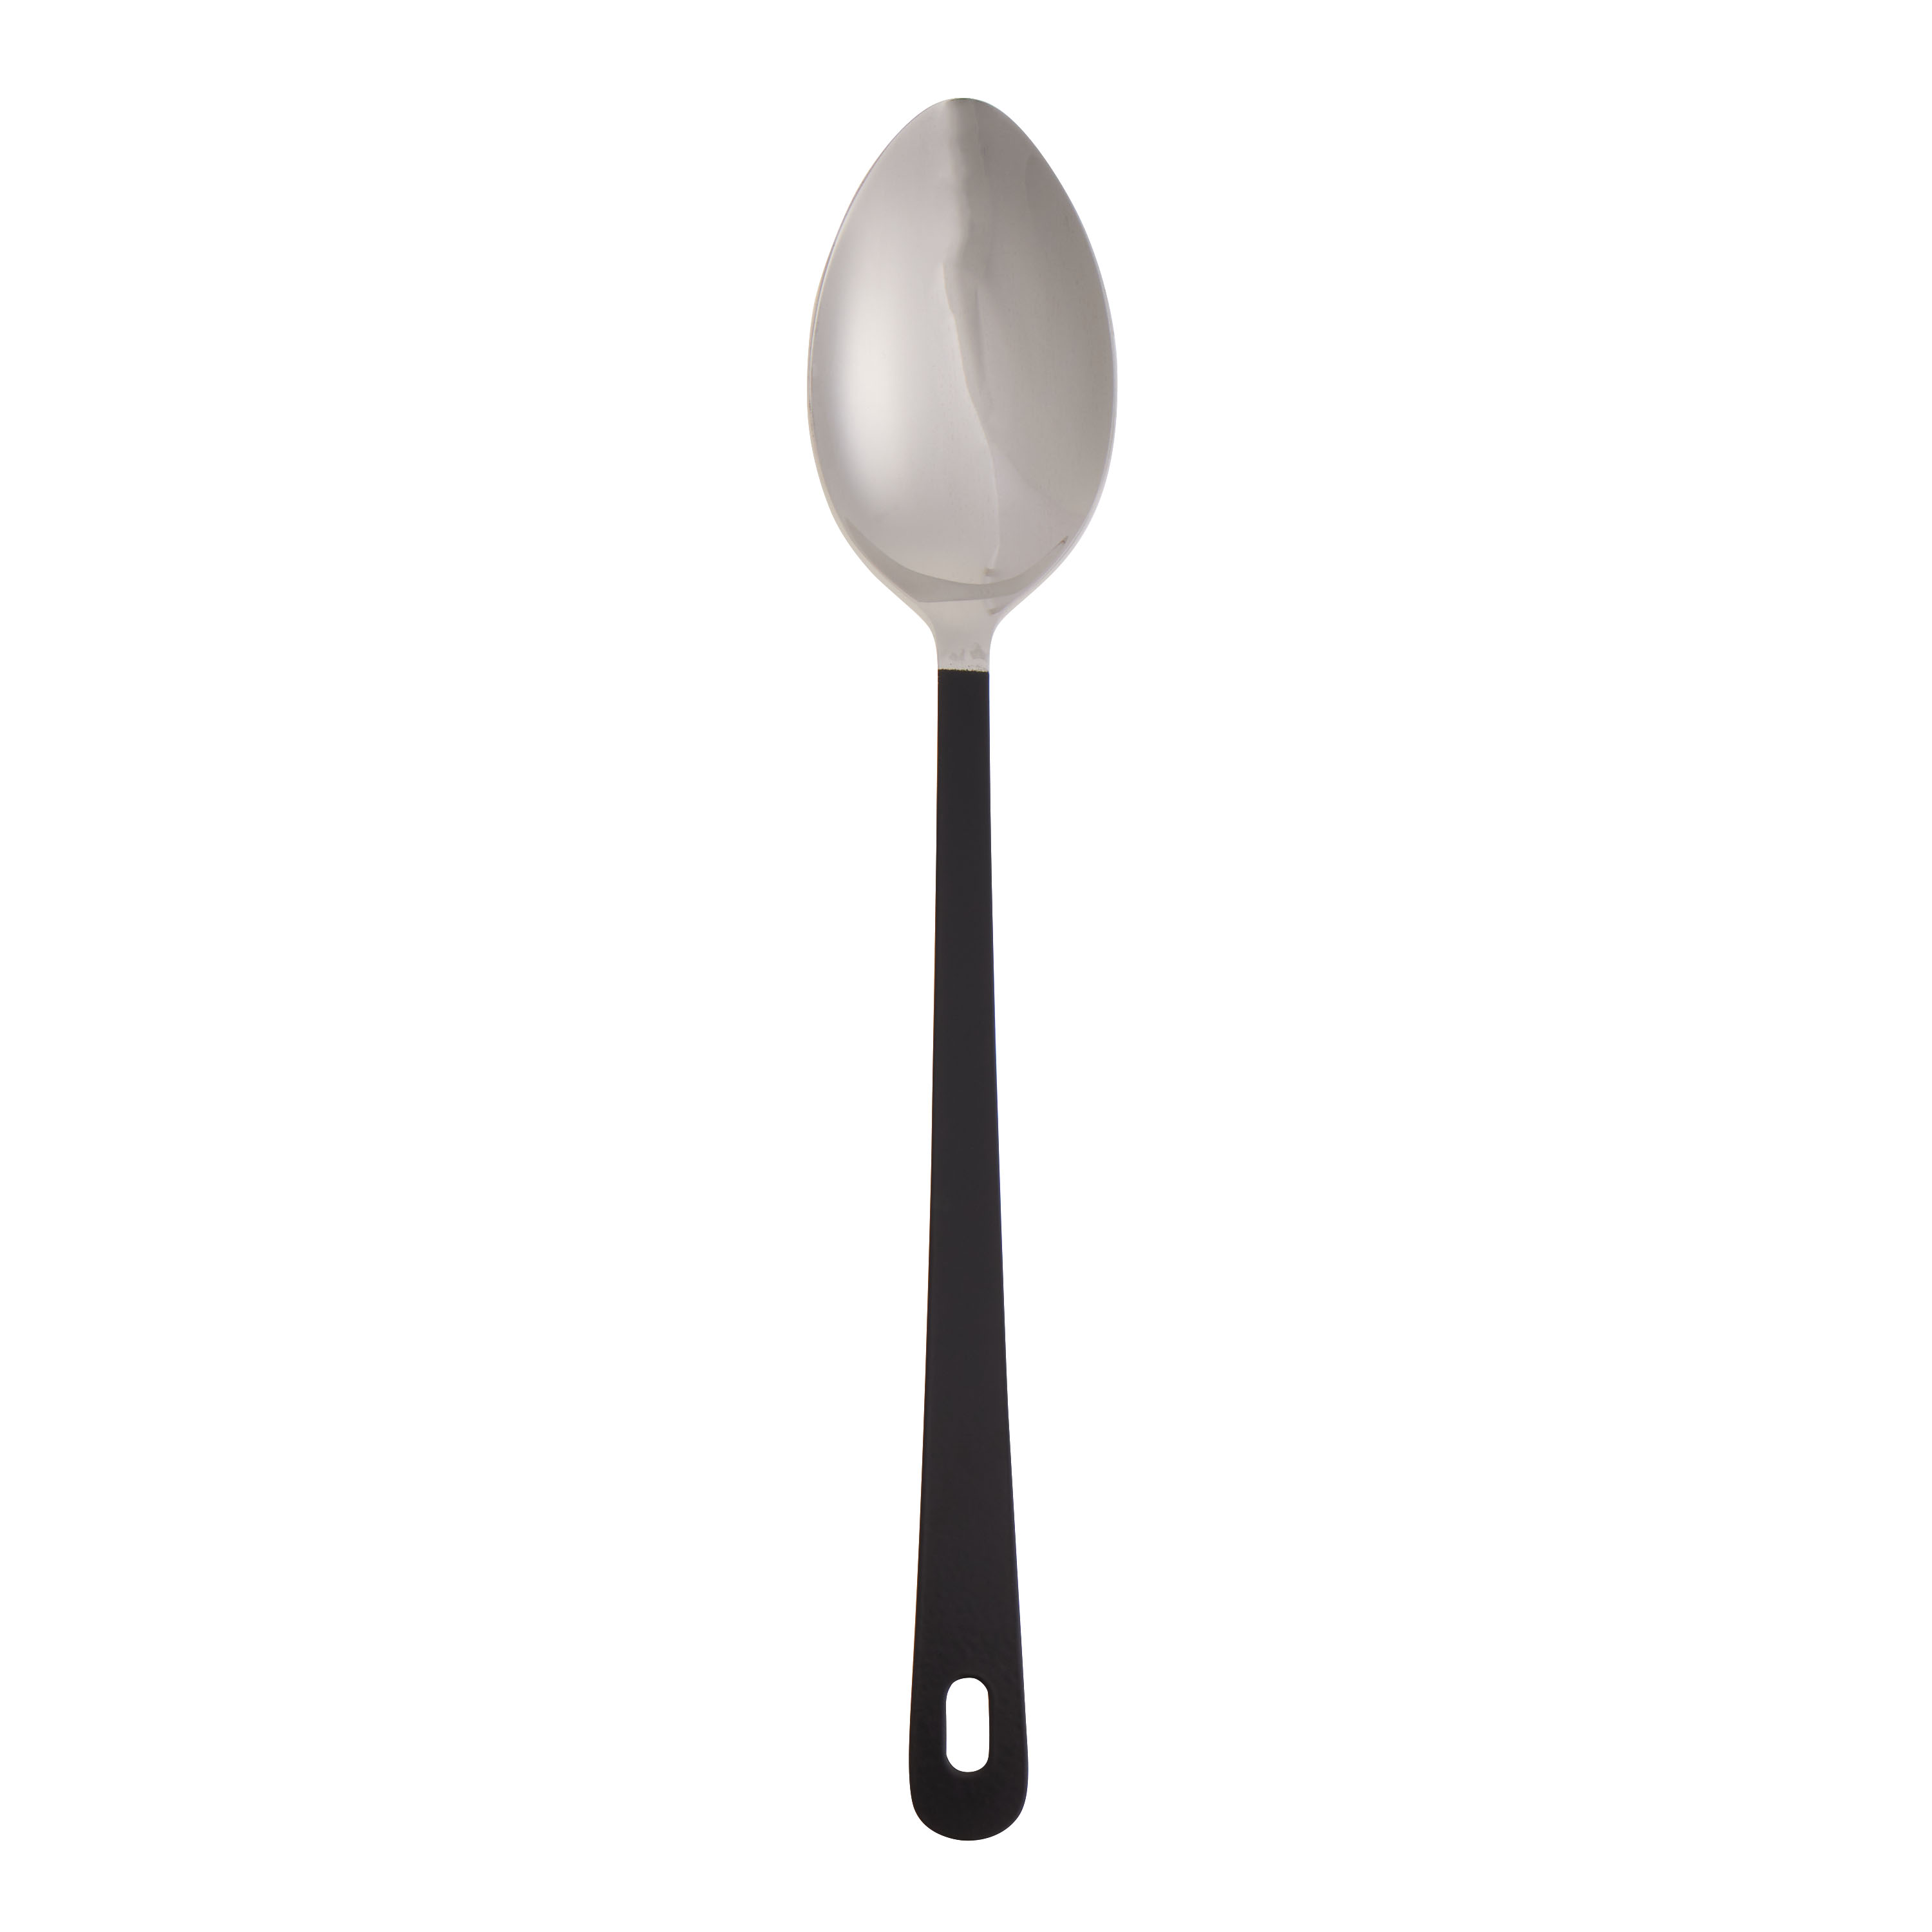 Amco Professional Performance Measuring Cups and Spoons Set